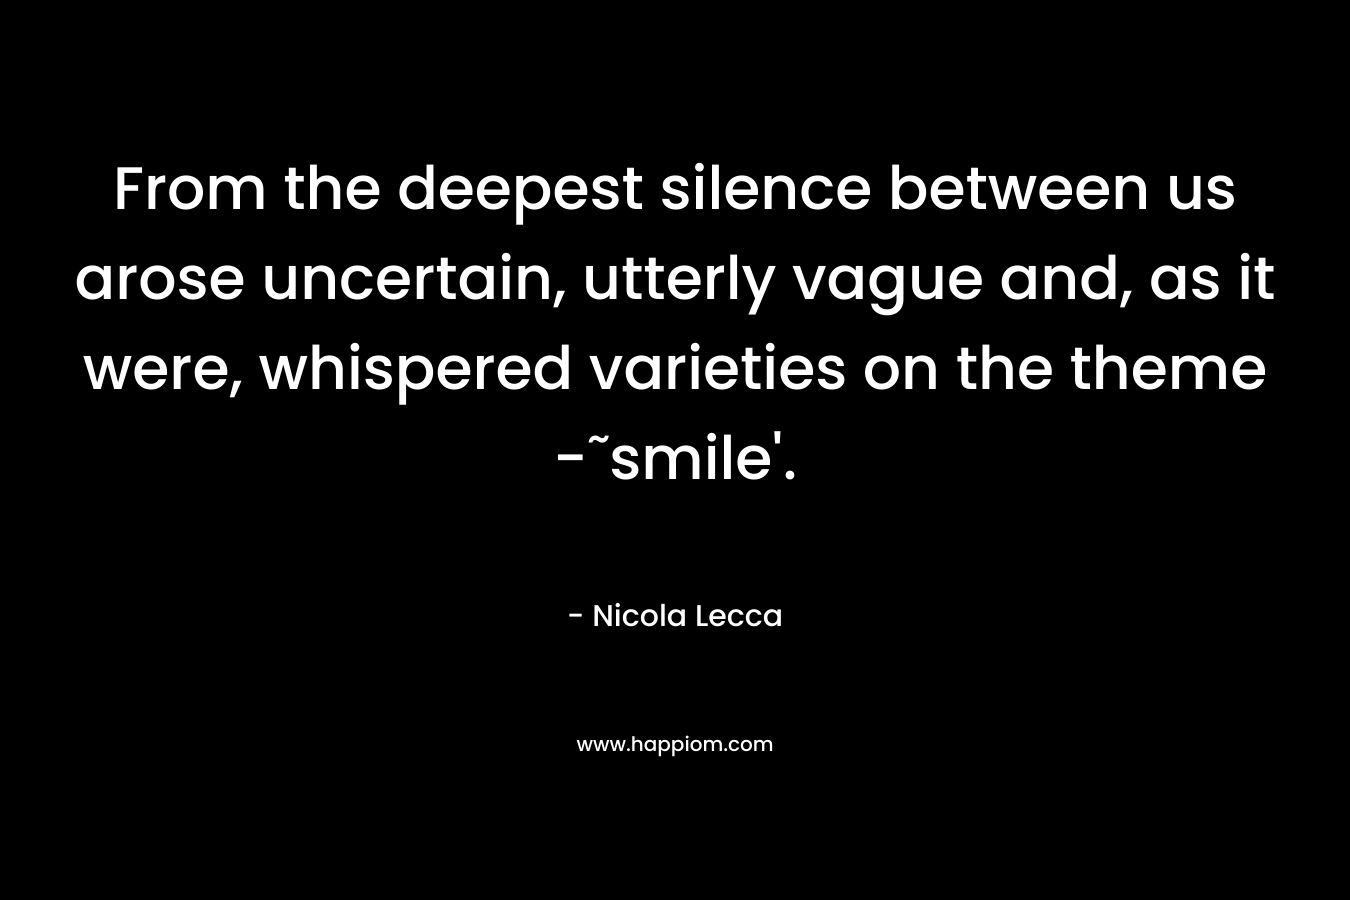 From the deepest silence between us arose uncertain, utterly vague and, as it were, whispered varieties on the theme -˜smile’. – Nicola Lecca